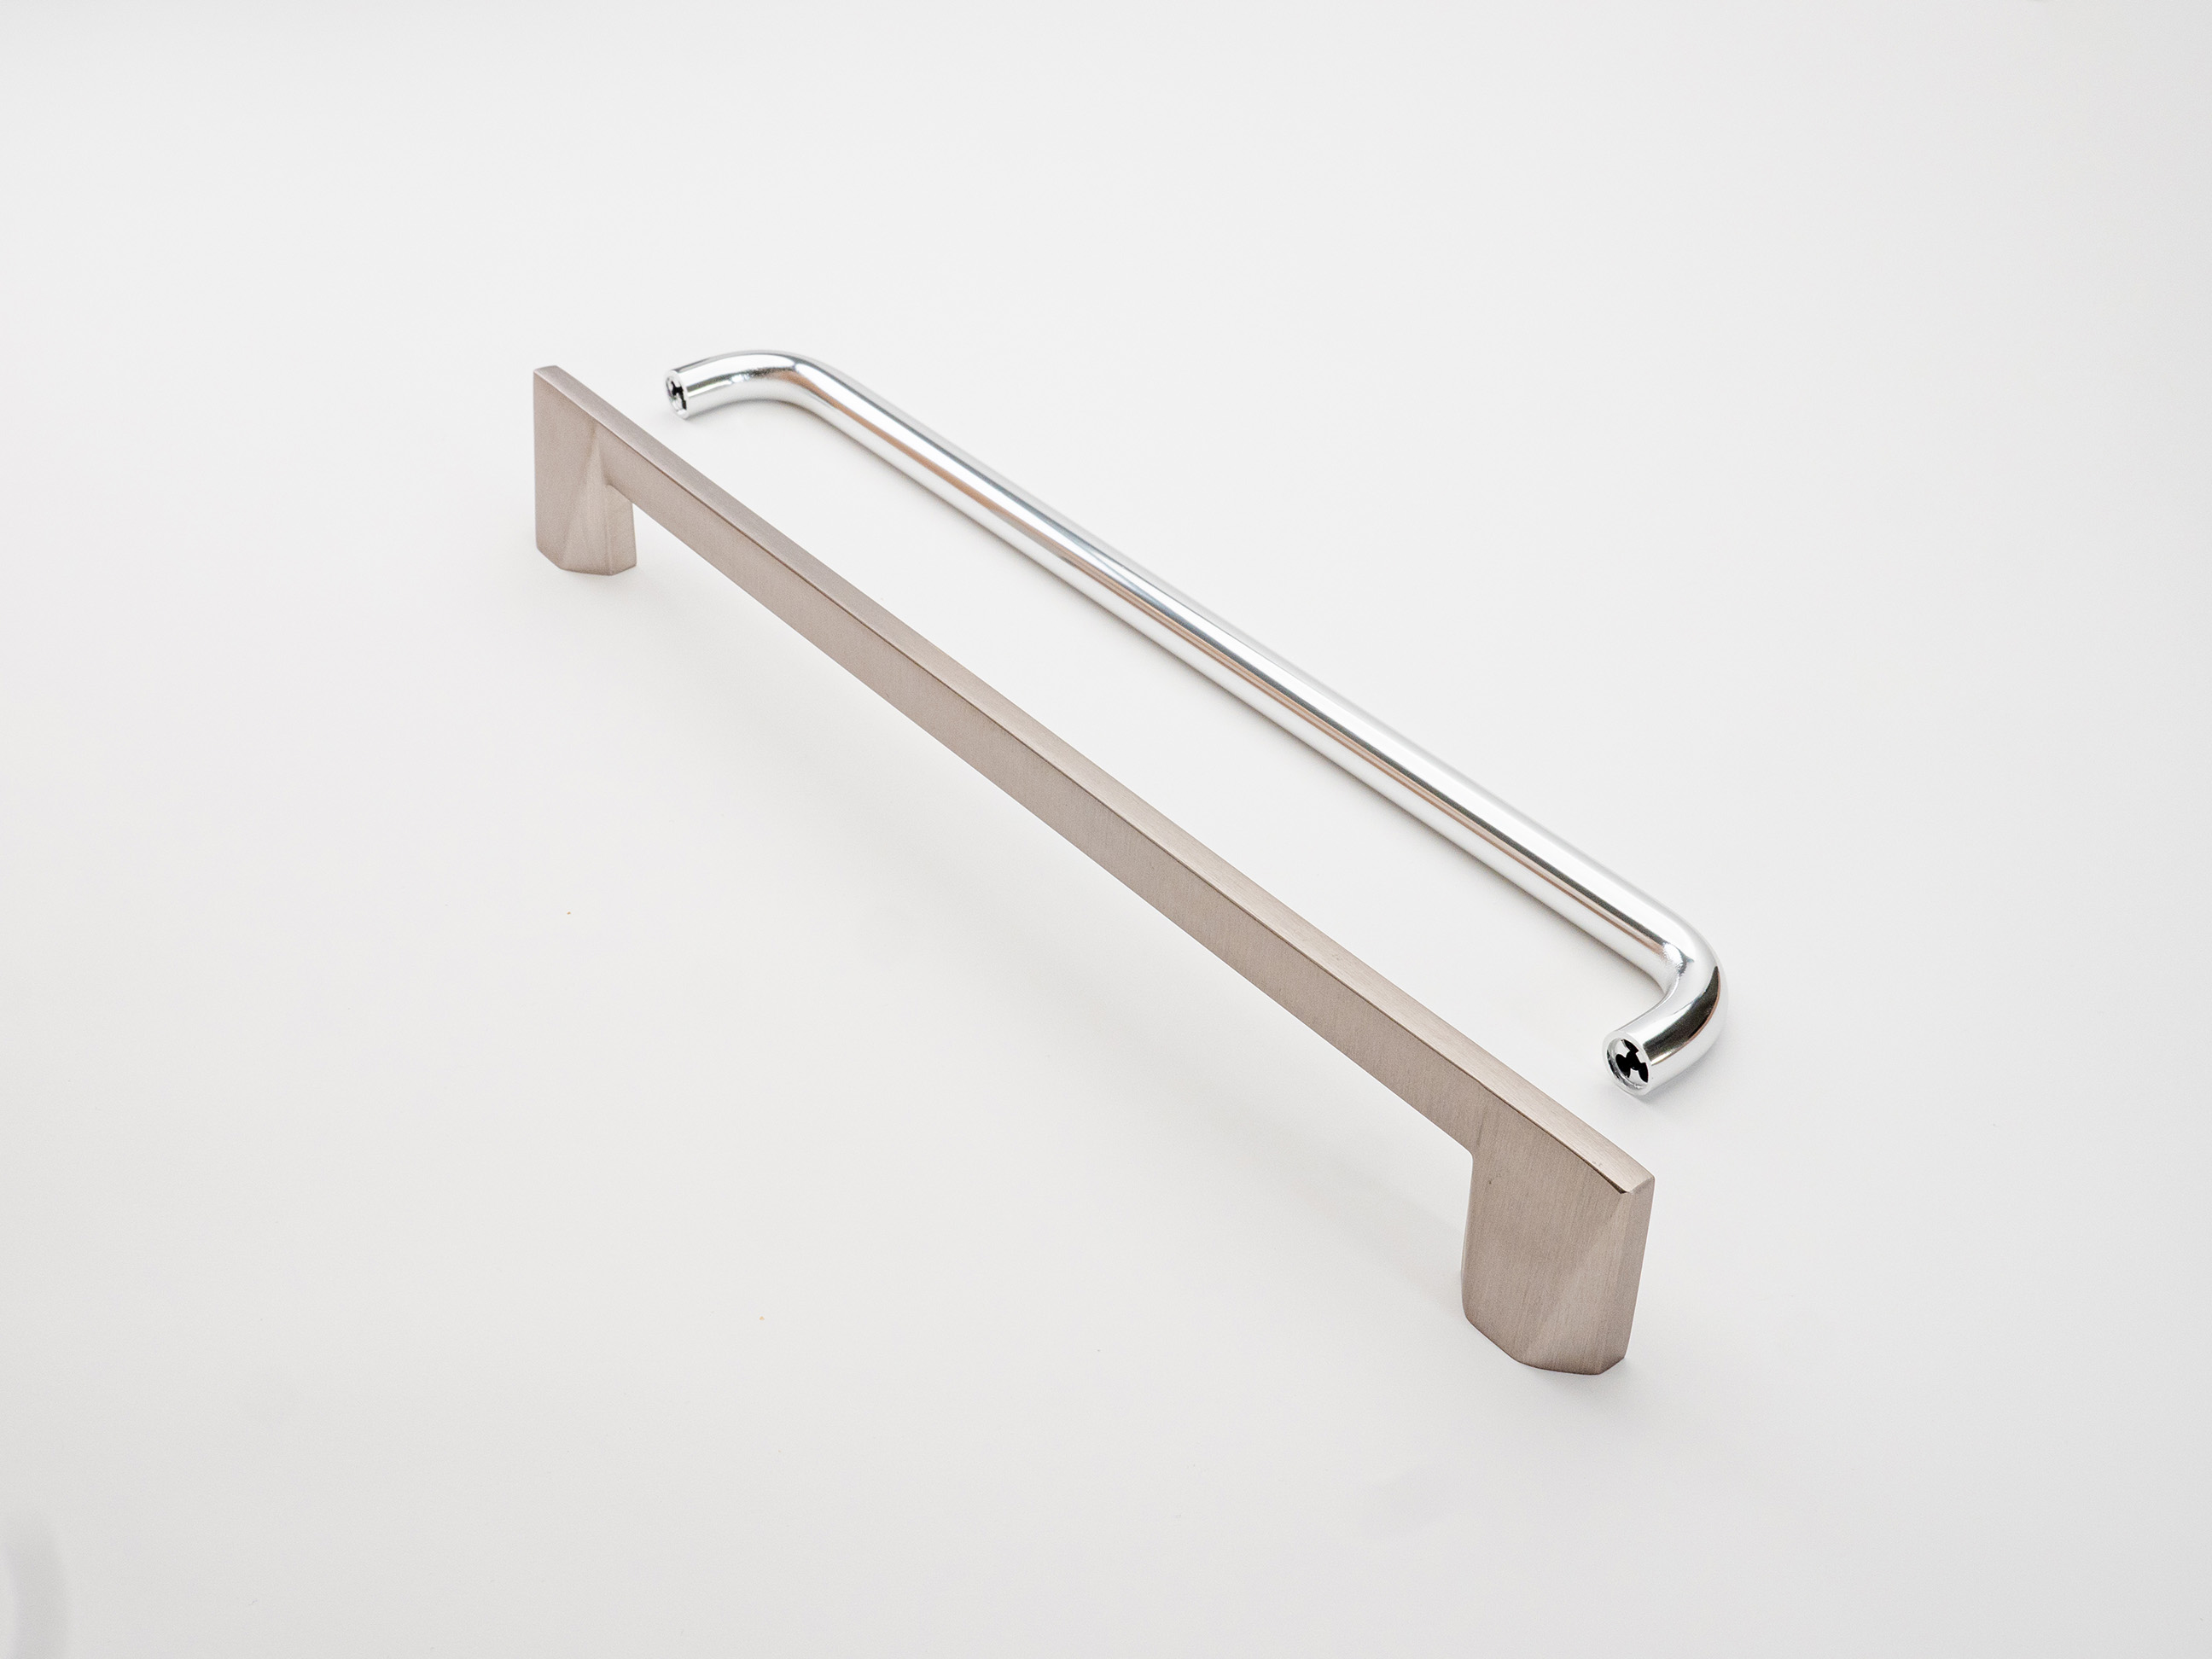 Oven handle - Anodized